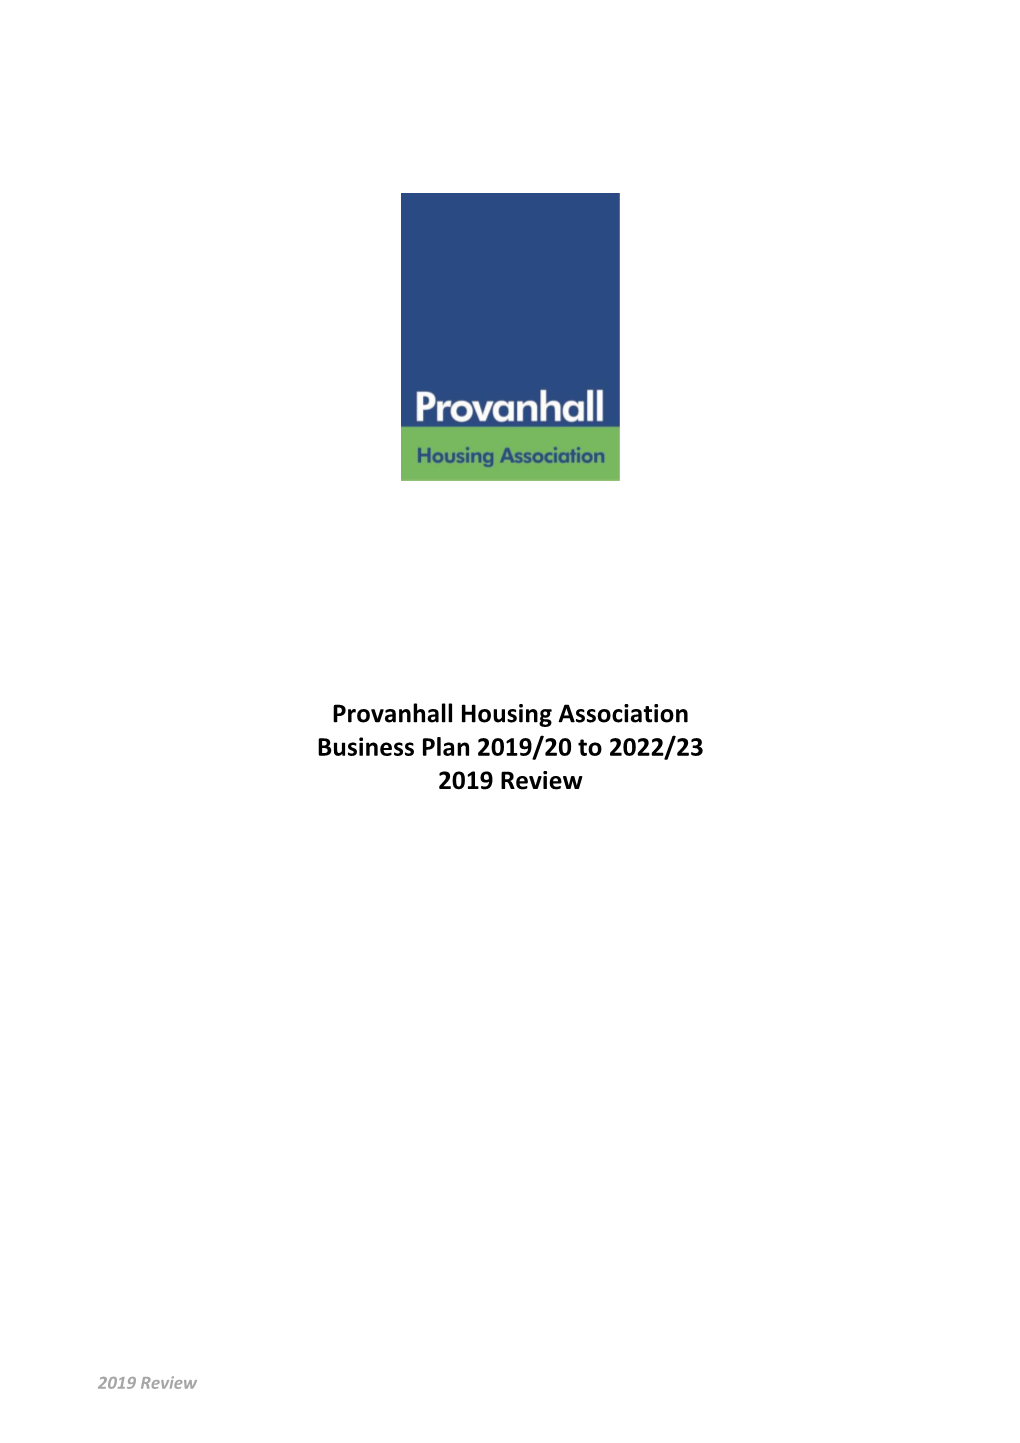 Provanhall Housing Association Business Plan 2019/20 to 2022/23 2019 Review